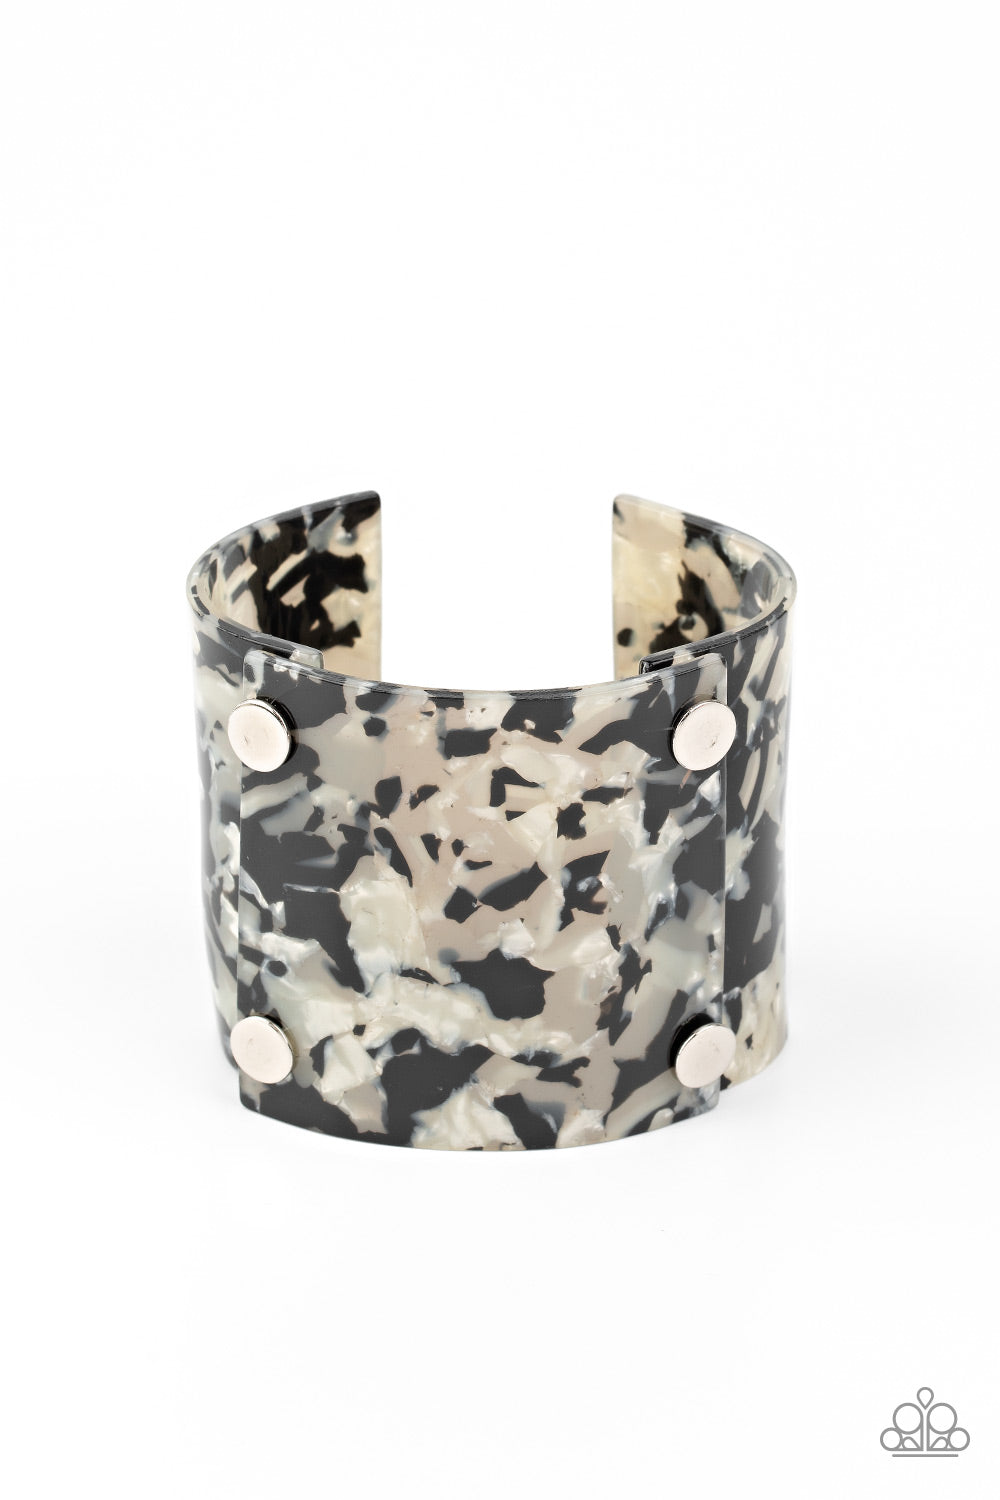 What are you waiting FAUX? - Silver Cuff Bracelet